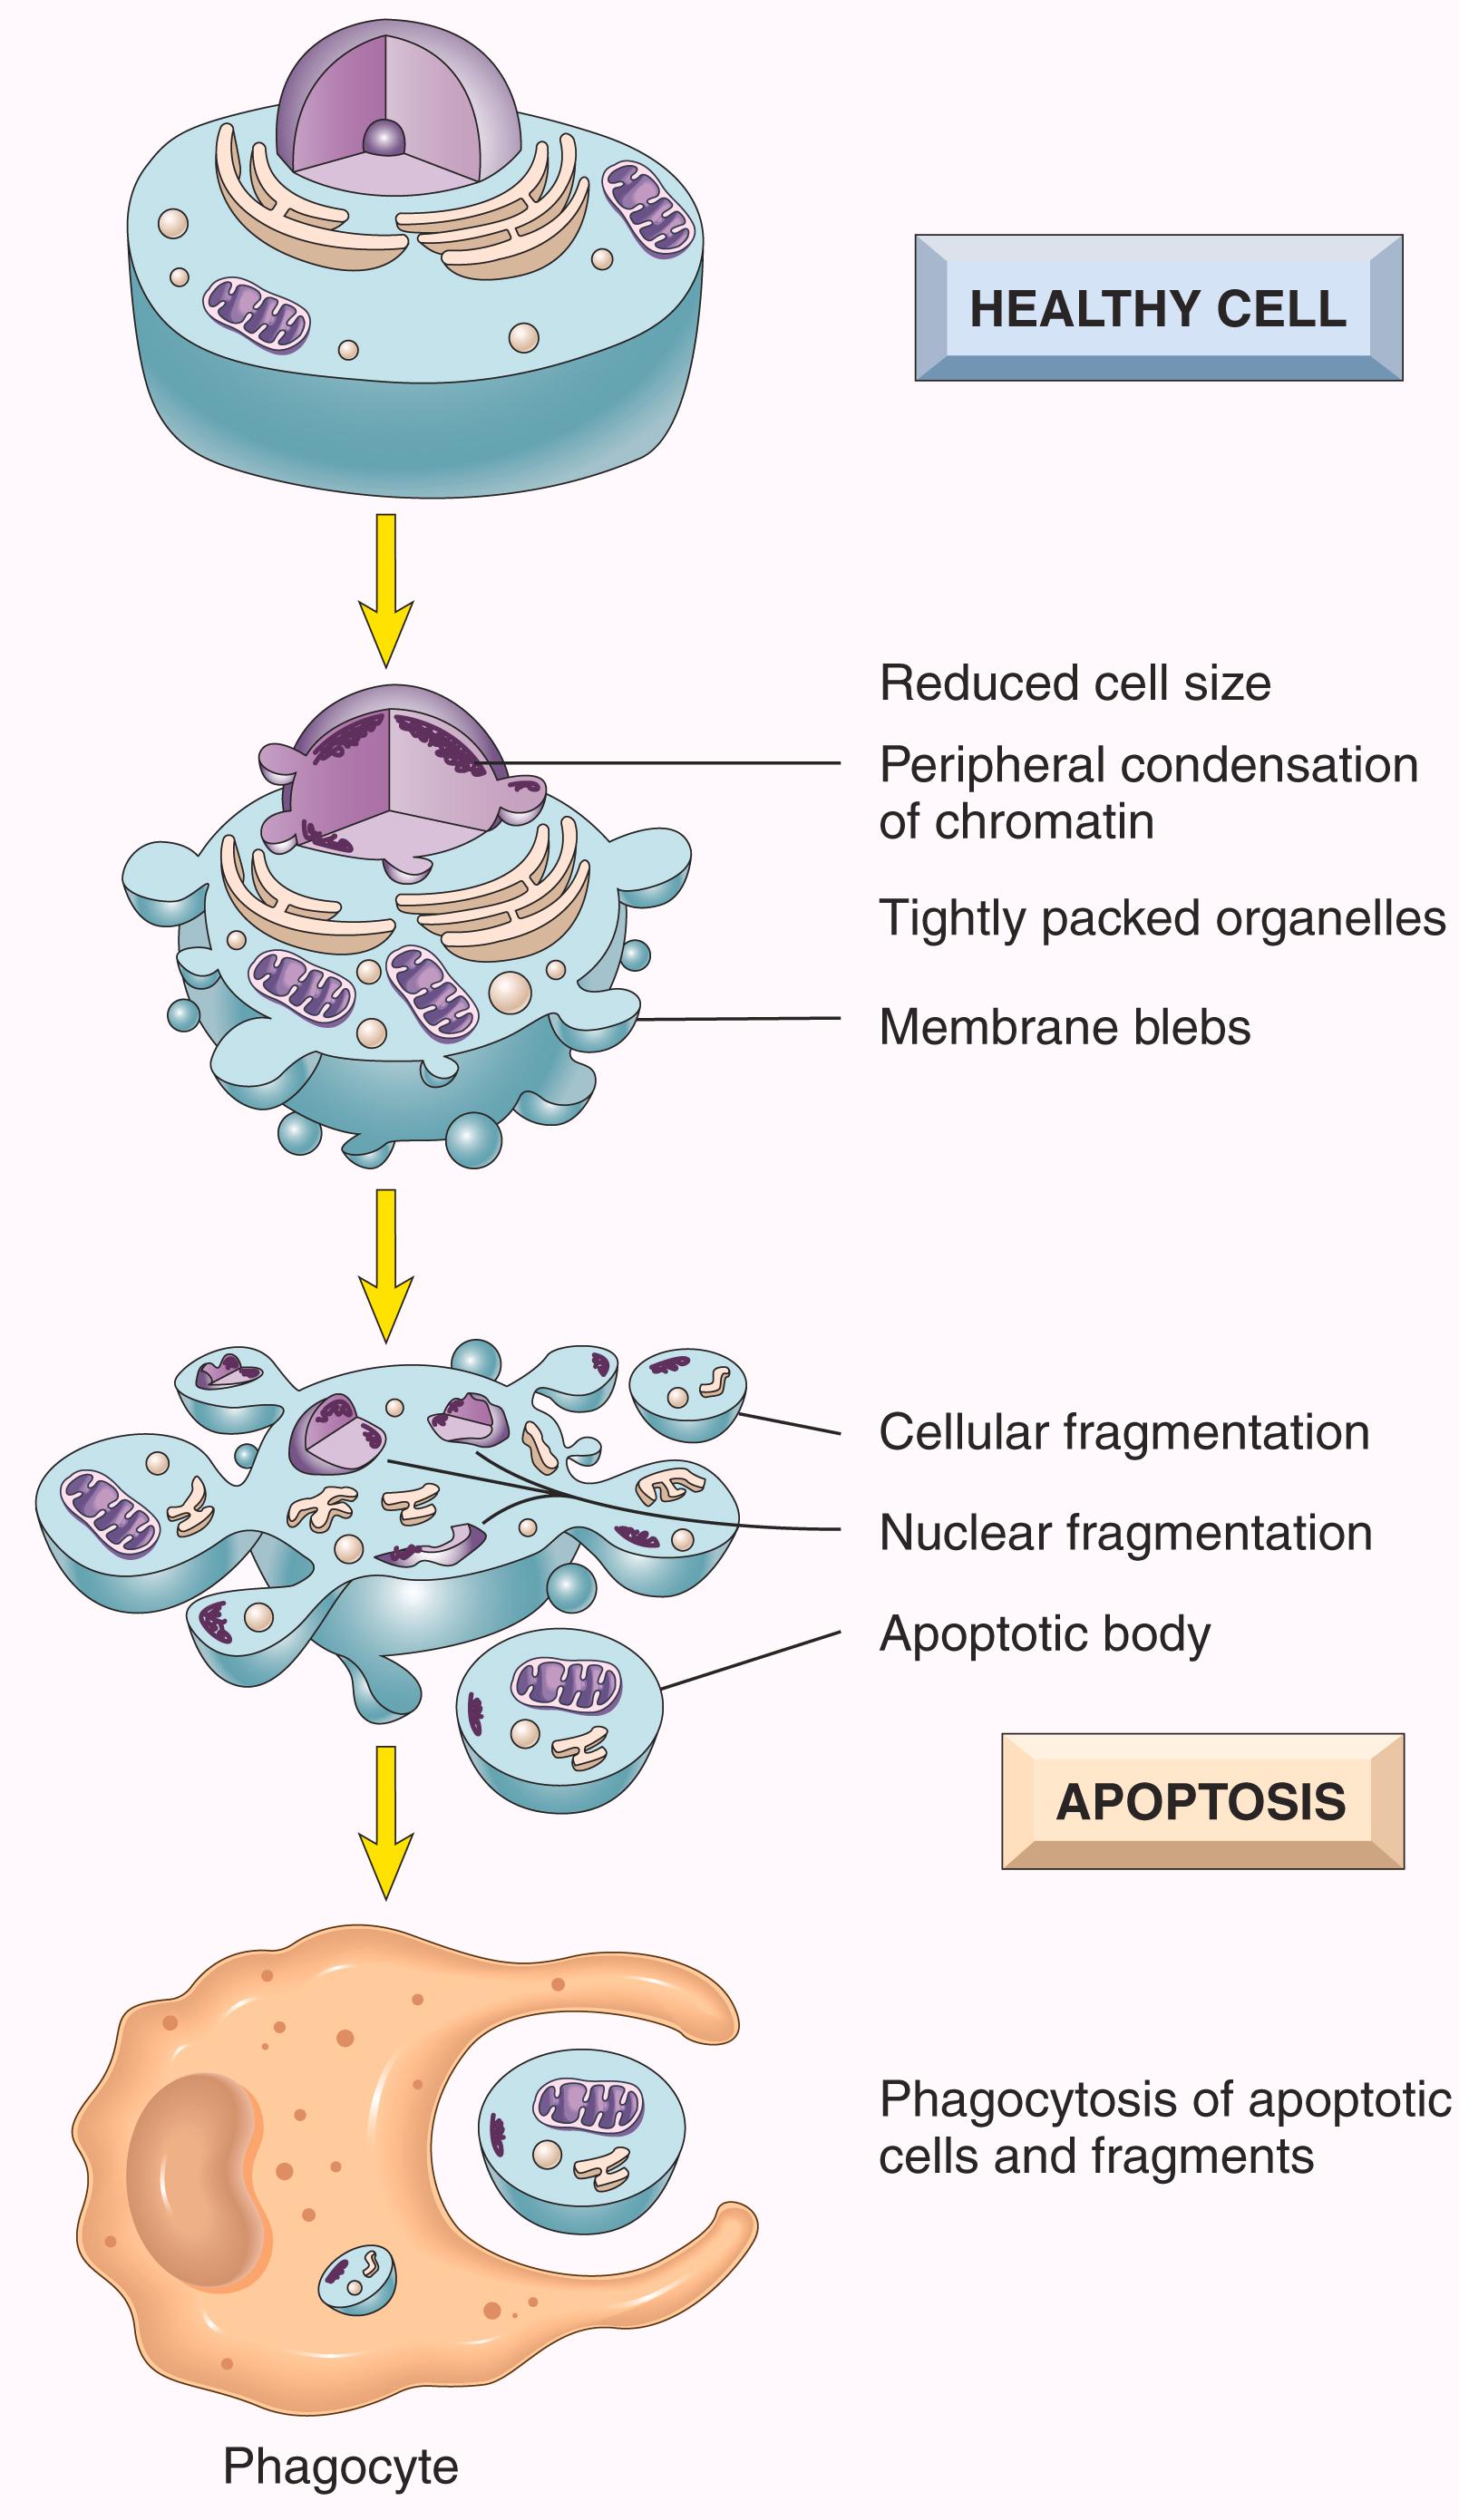 FIG. 1.11, Apoptosis. The cellular alterations in apoptosis are illustrated. Contrast these with the changes that characterize necrotic cell death, shown in Fig. 1.3 .